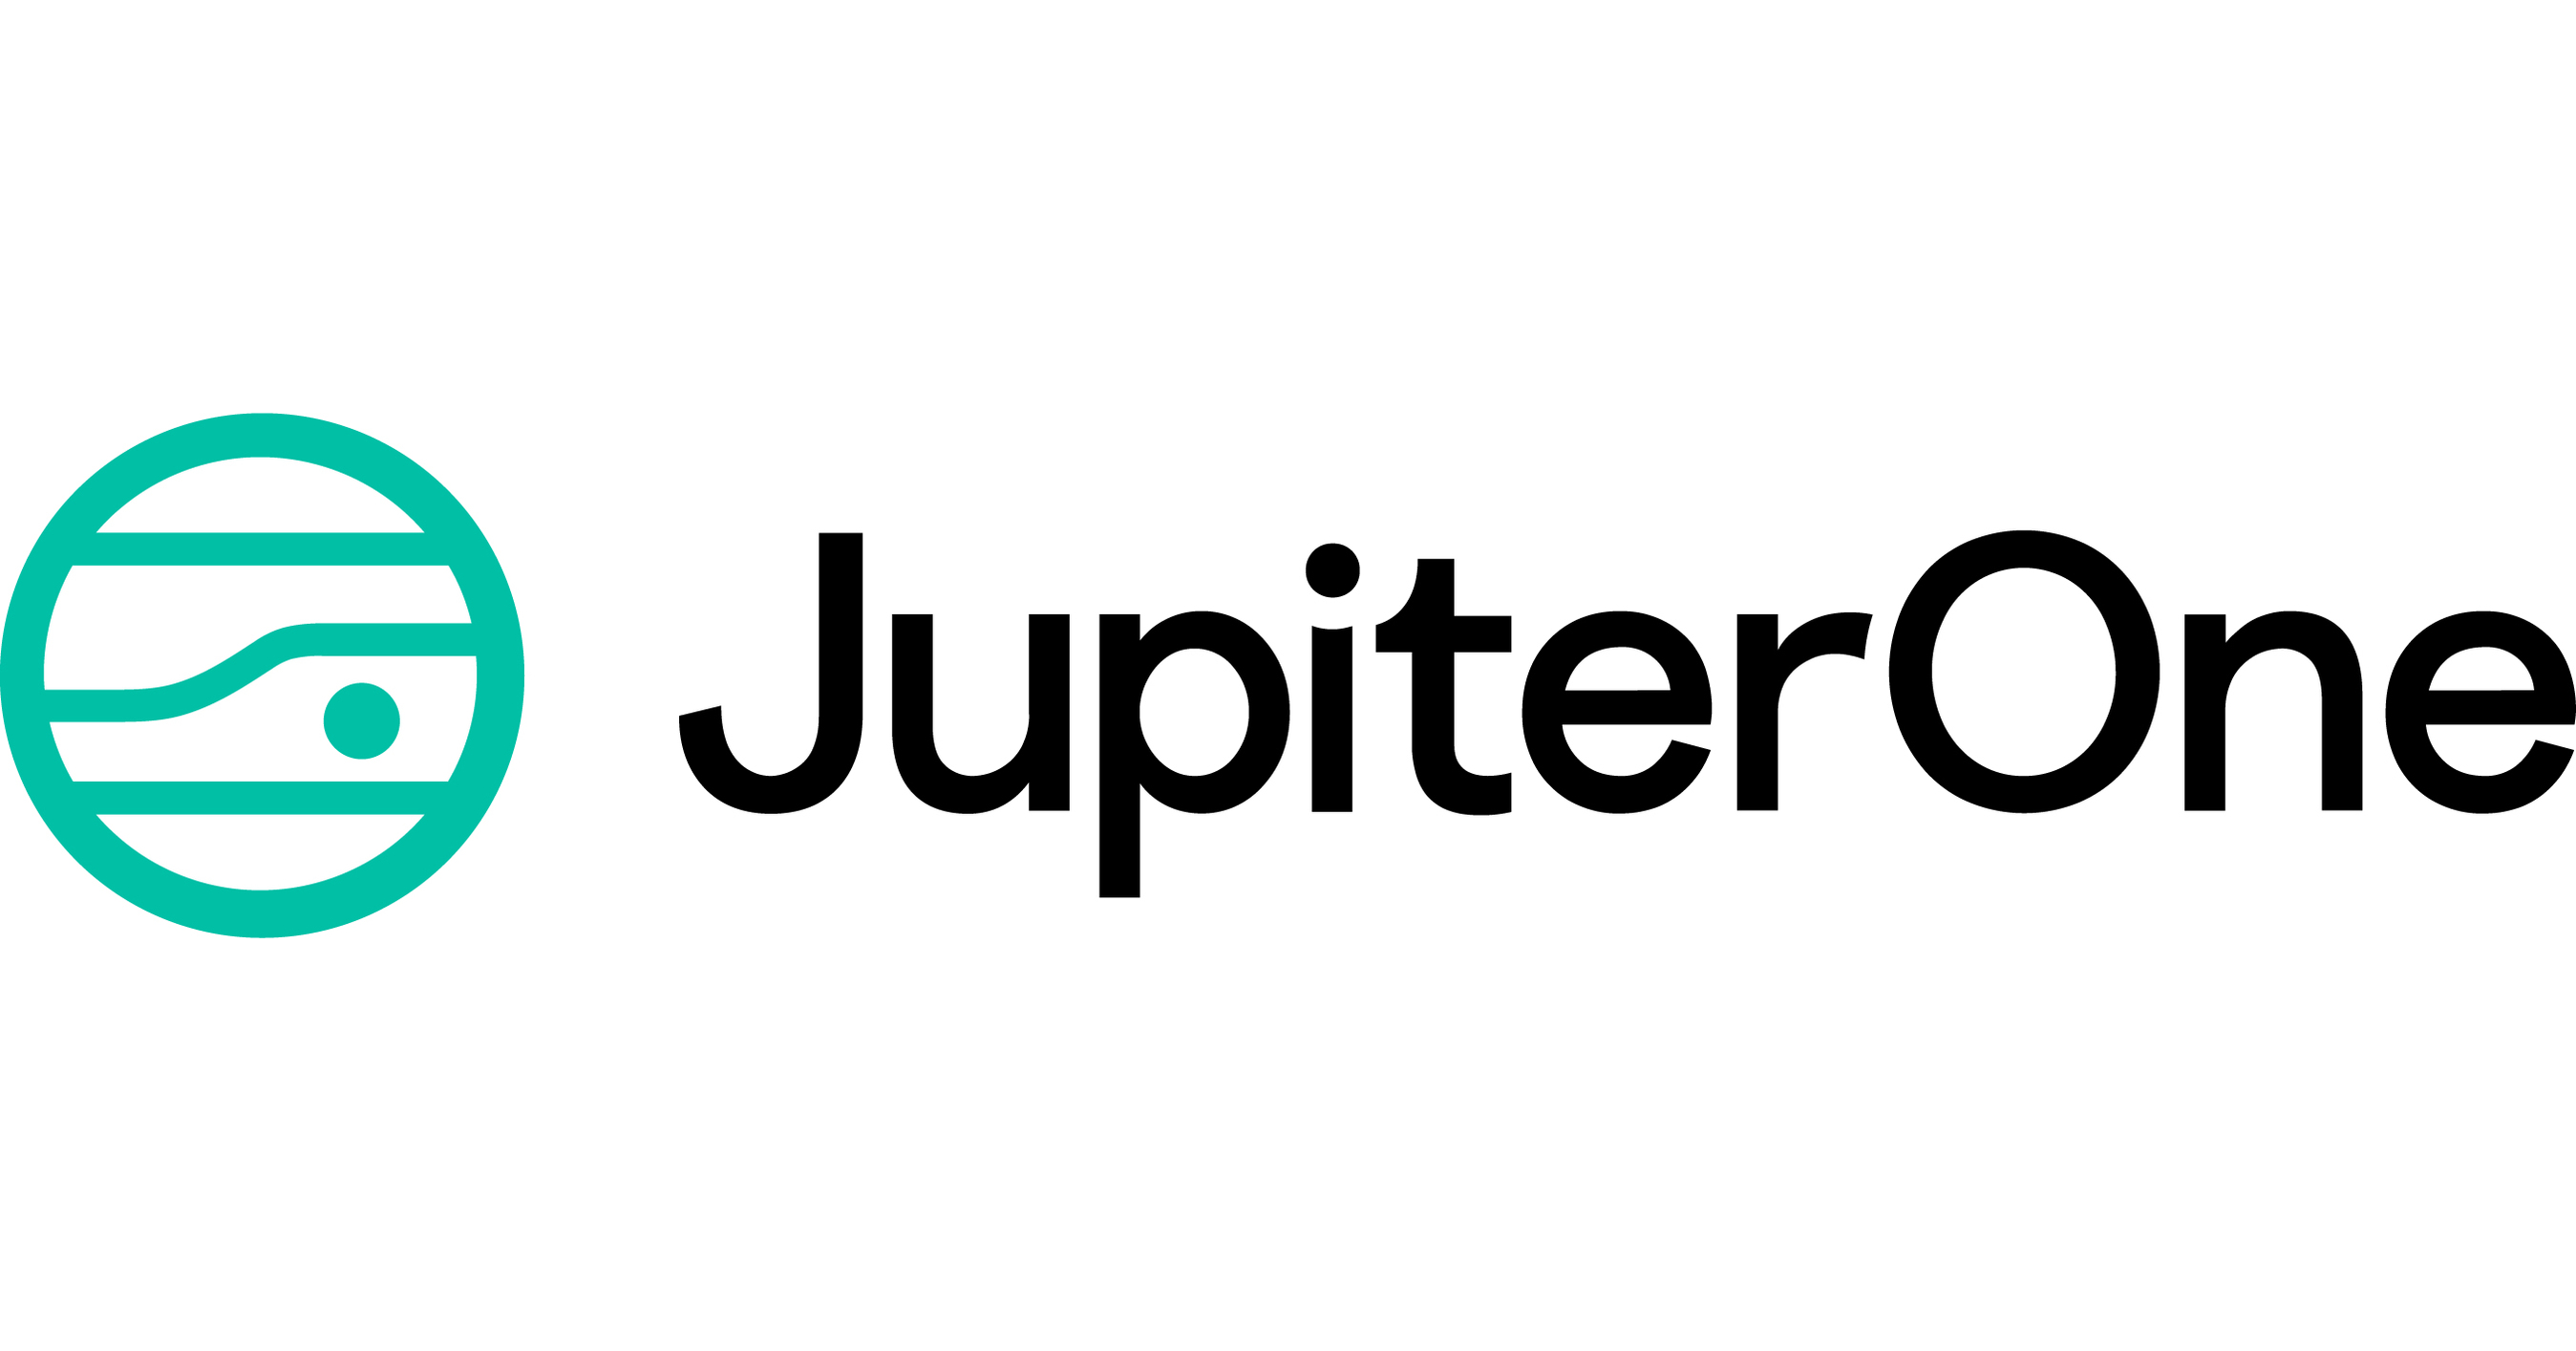 JupiterOne Launches Stellar Technology Alliance Program To Help Customers with Cyber Asset Management, Integration, and Visibility